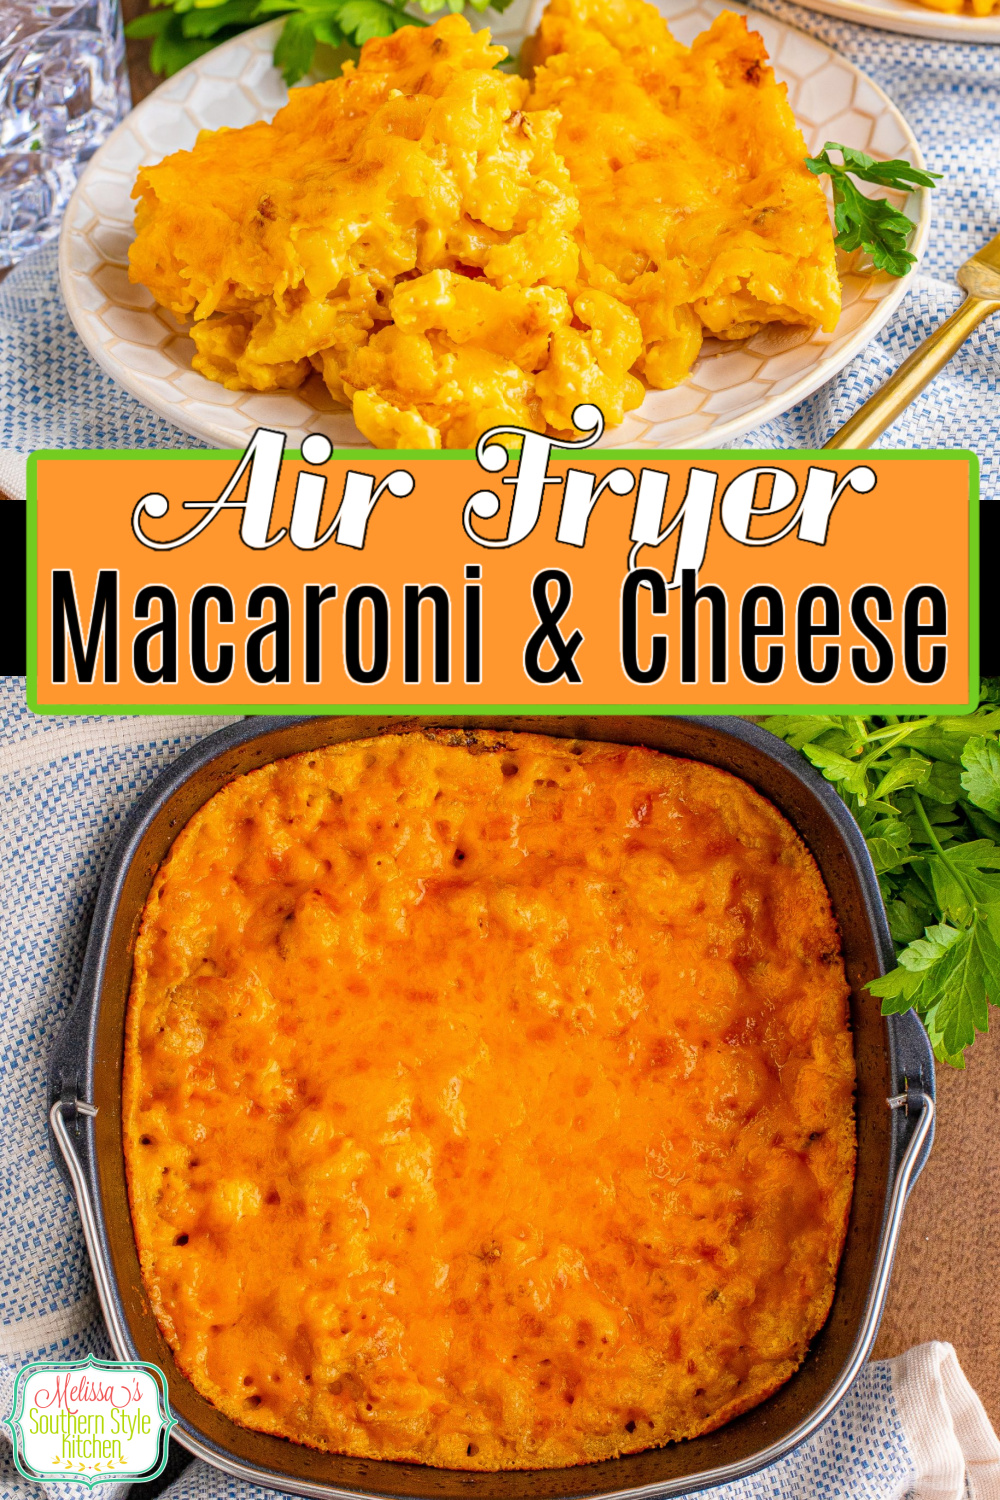 This small batch Air Fryer Macaroni and Cheese recipe features a simple creamy cheese sauce that comes together in no time flat #airfryerrecipes #macandcheese #macaroniandcheese #southernmacandcheeserecipe #easymacaroniandcheeserecipe via @melissasssk